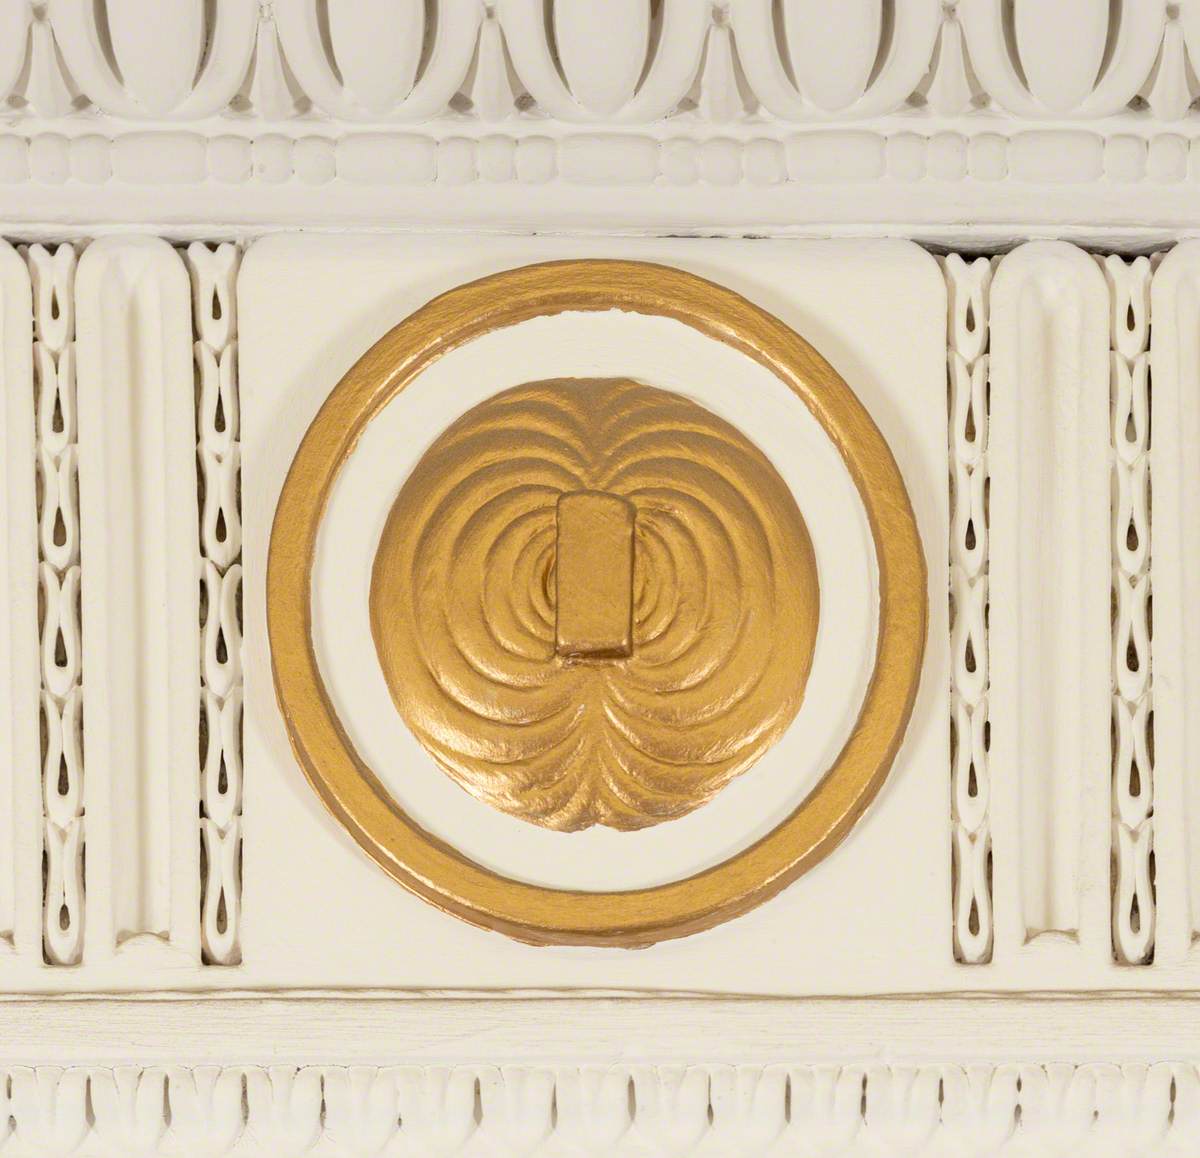 Plaster Roundel Depicting Faraday's Magnetic Lines of Force Experiment